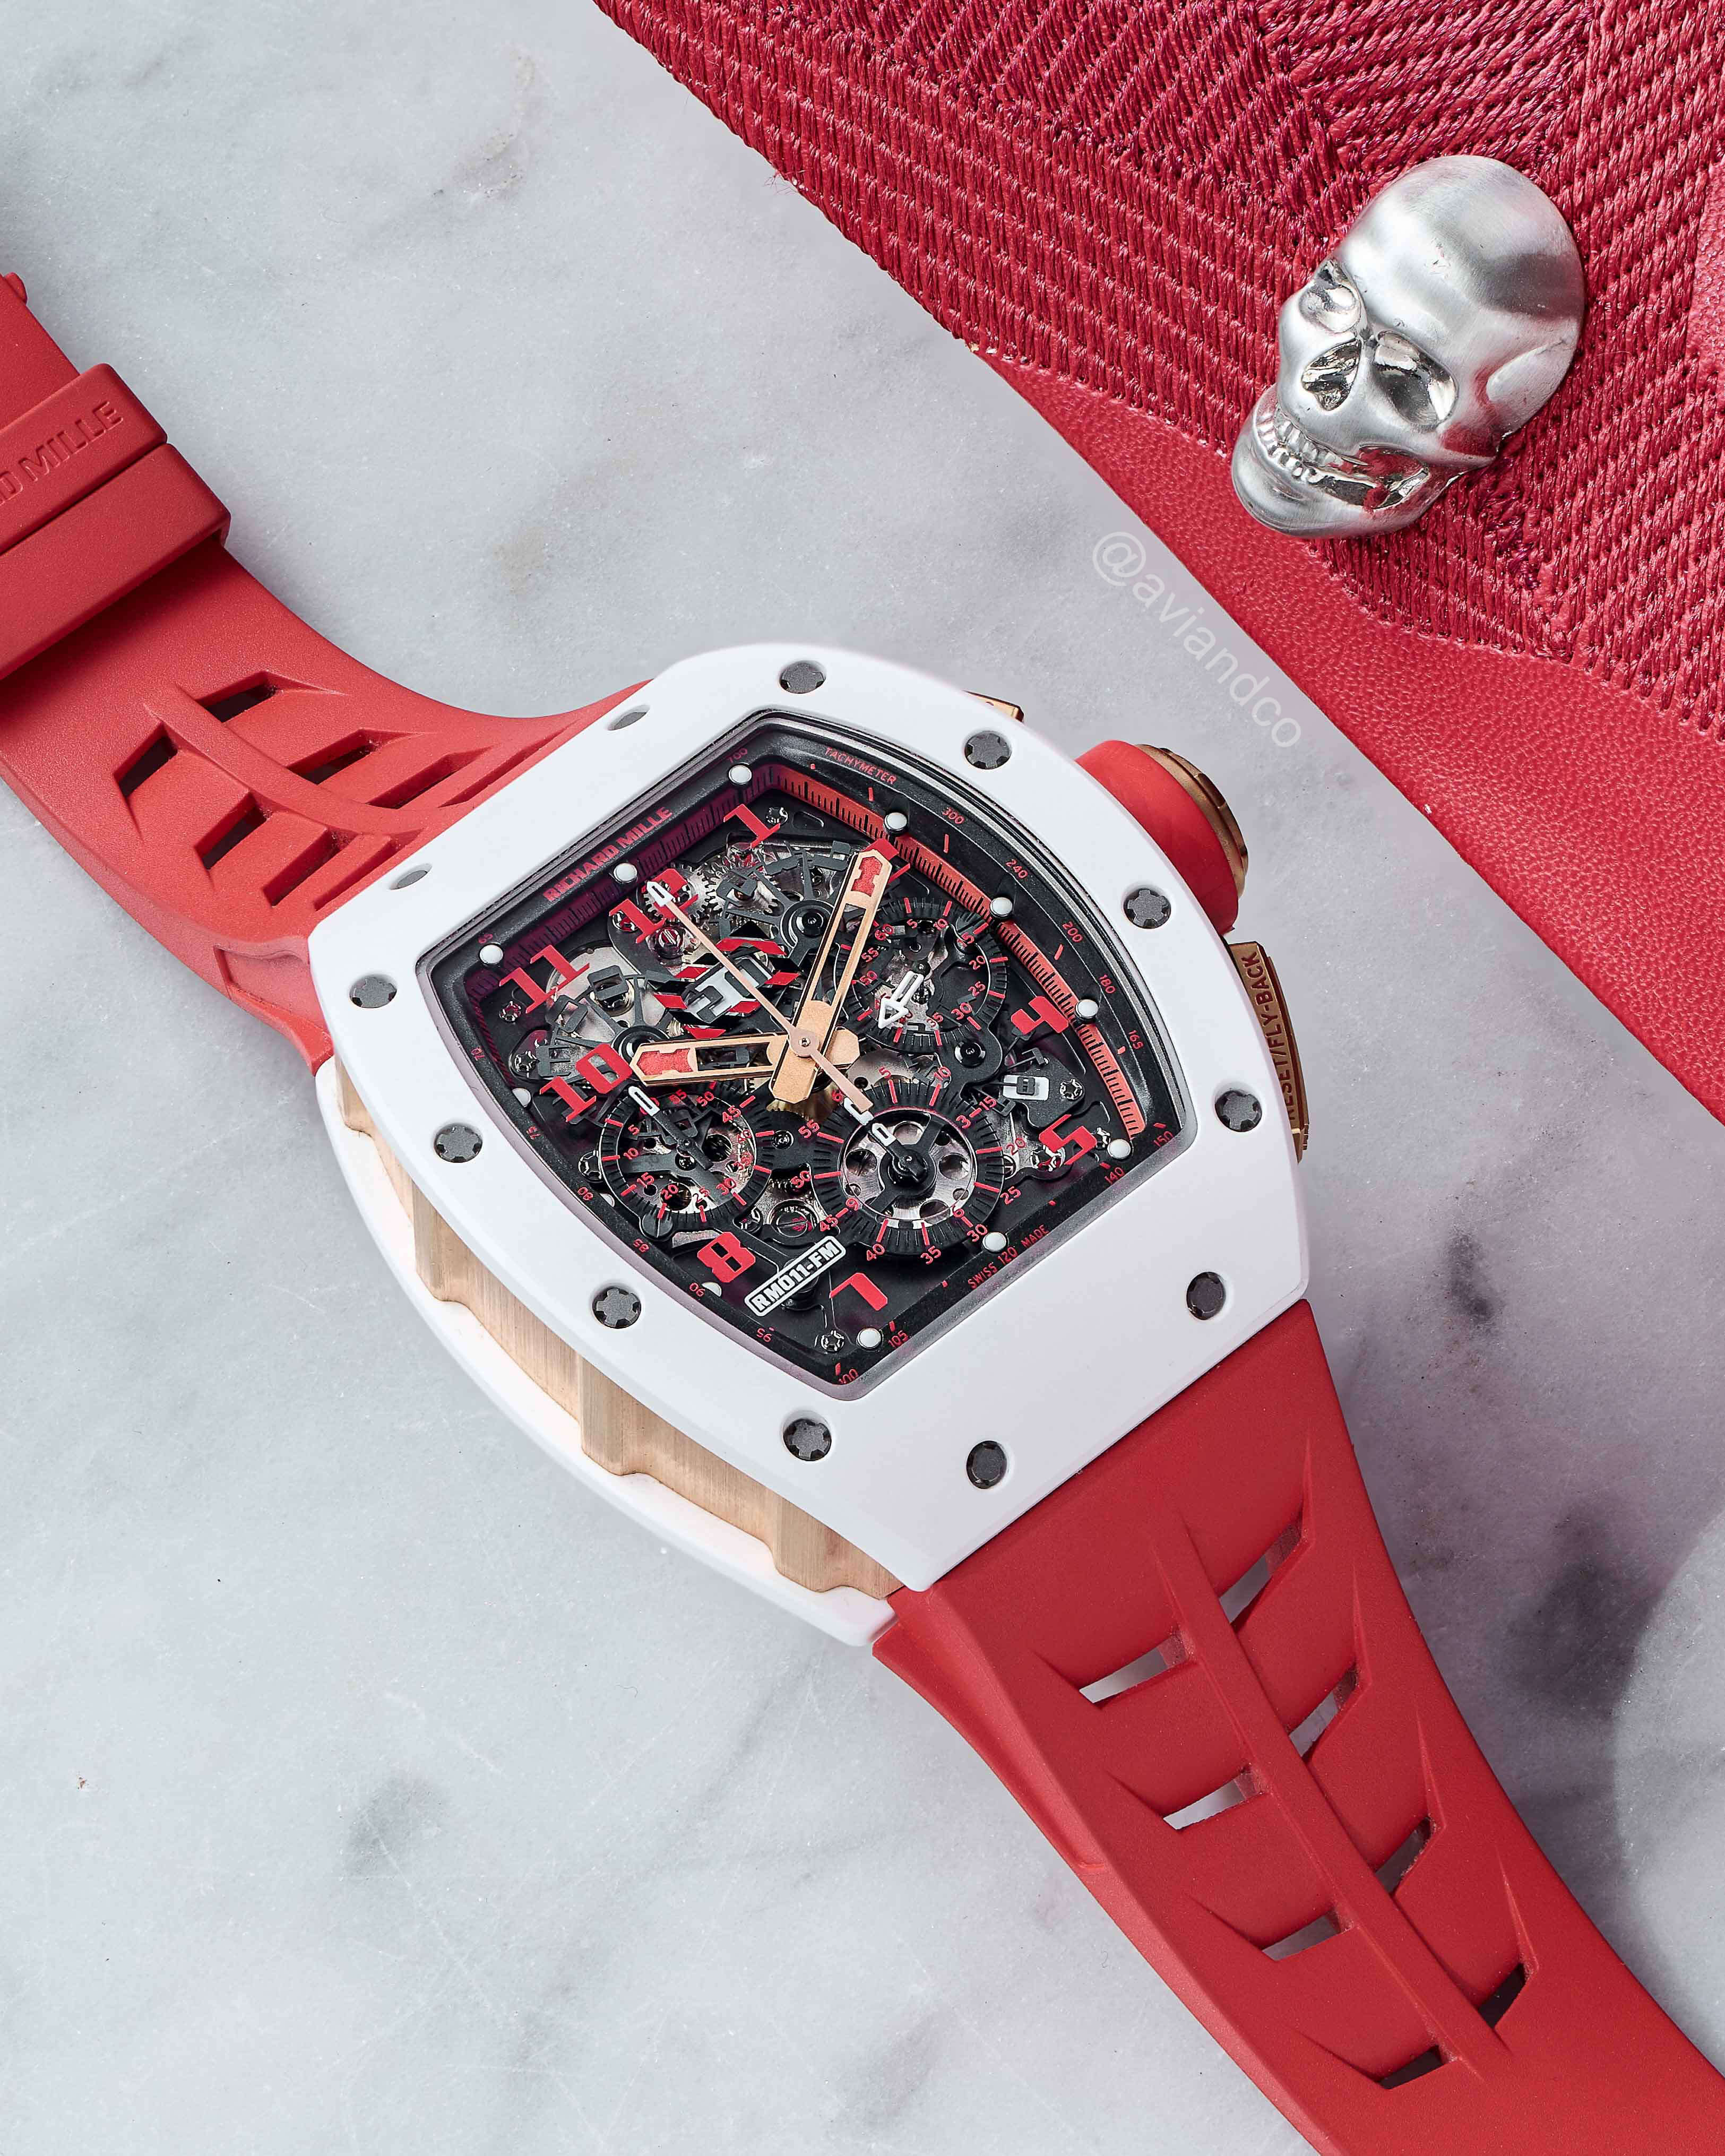 Red Rubber Strap Richard Mille Timepiece with White Bezel and Red Hour Markers Laid Out on White Marble Tabletop.